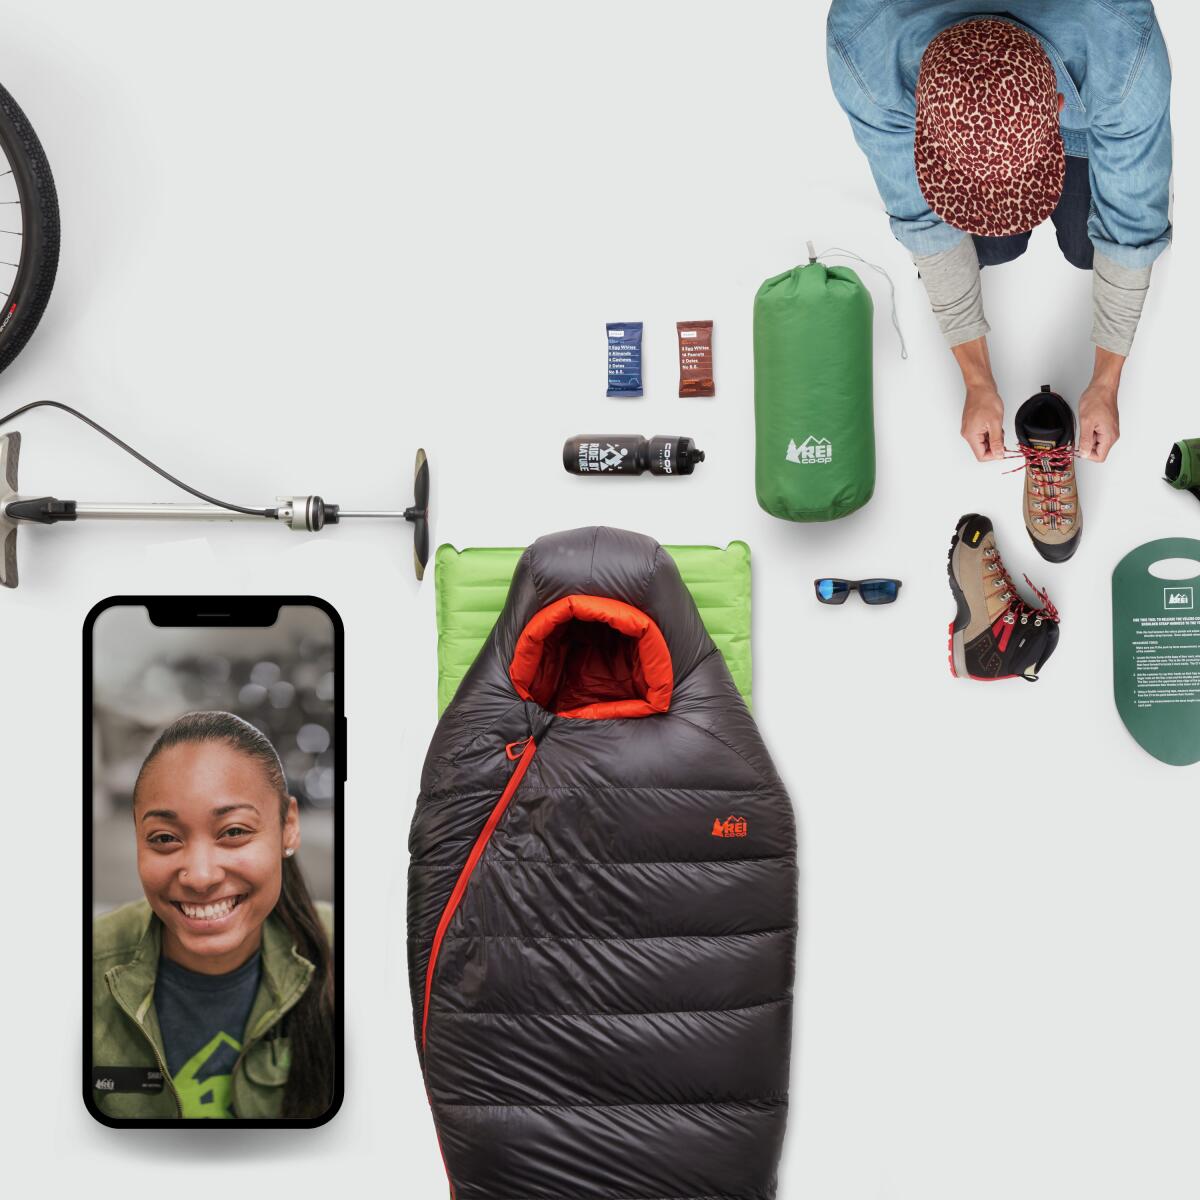 Illustrated photos with camping gear and photo of an iPhone with virtual outfitter on screen